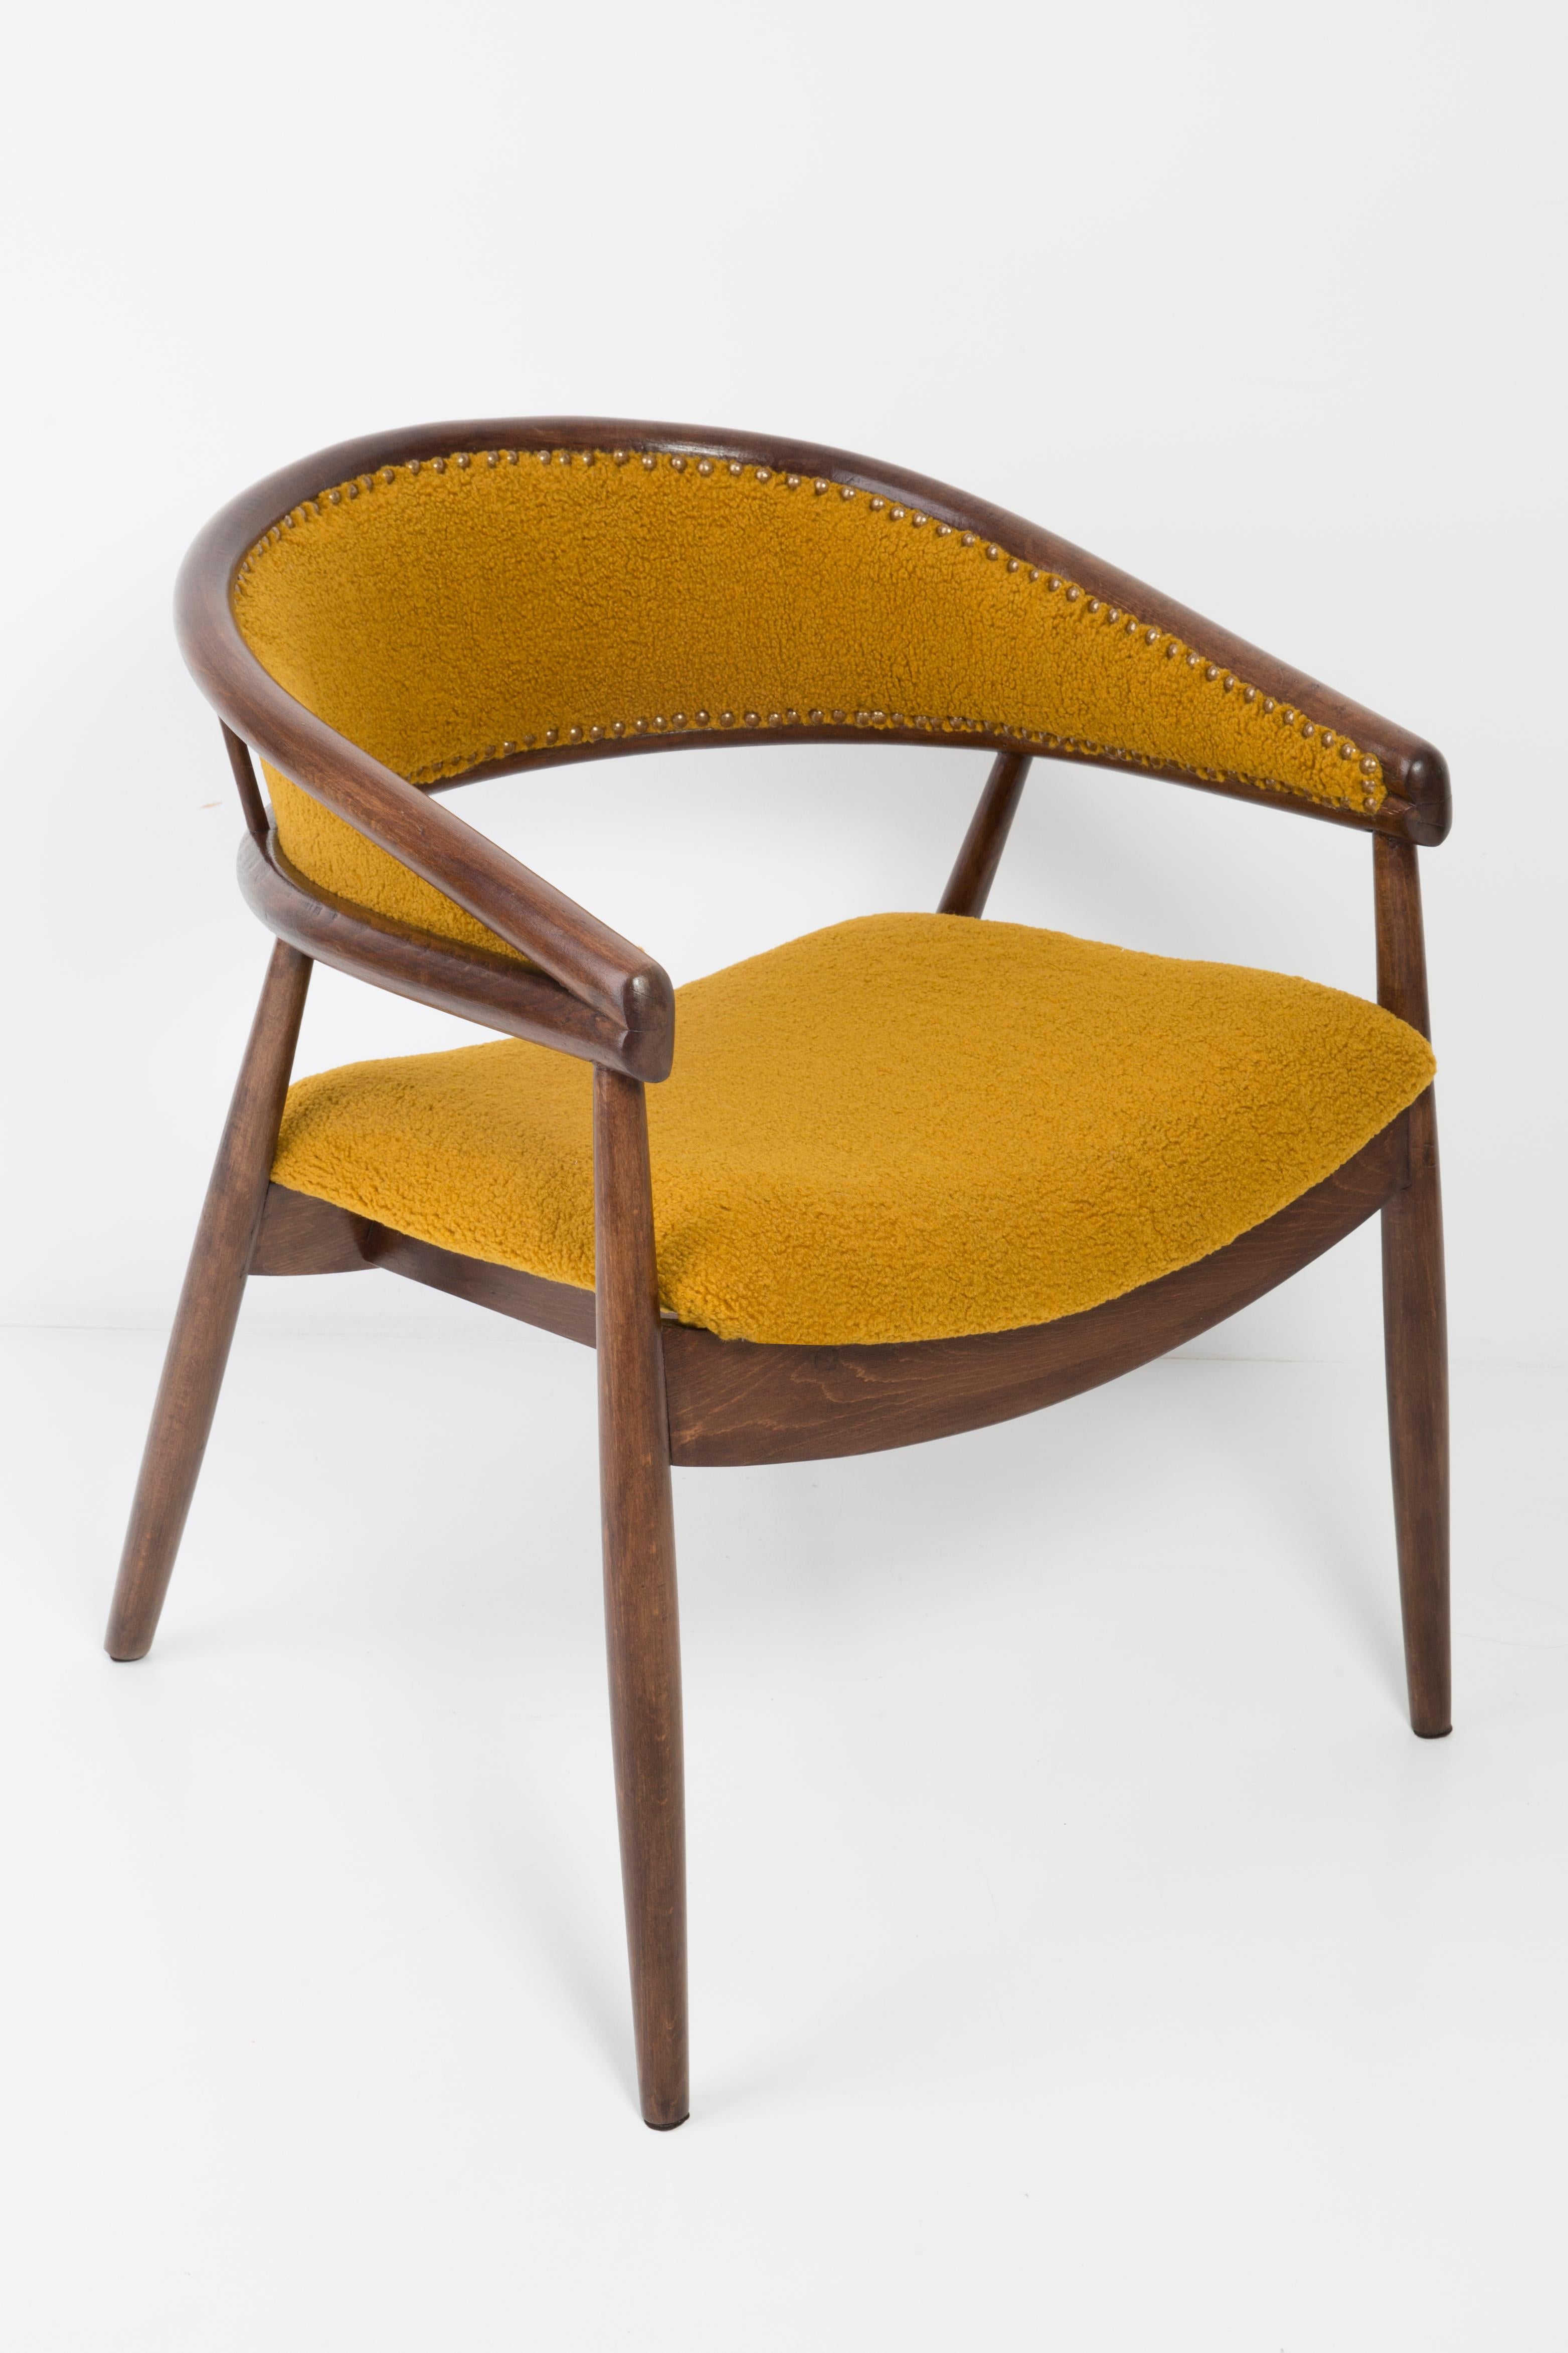 Set of James Mont Bent Beech Armchairs and Table, Yellow Ochra Boucle, 1960s In Excellent Condition For Sale In 05-080 Hornowek, PL